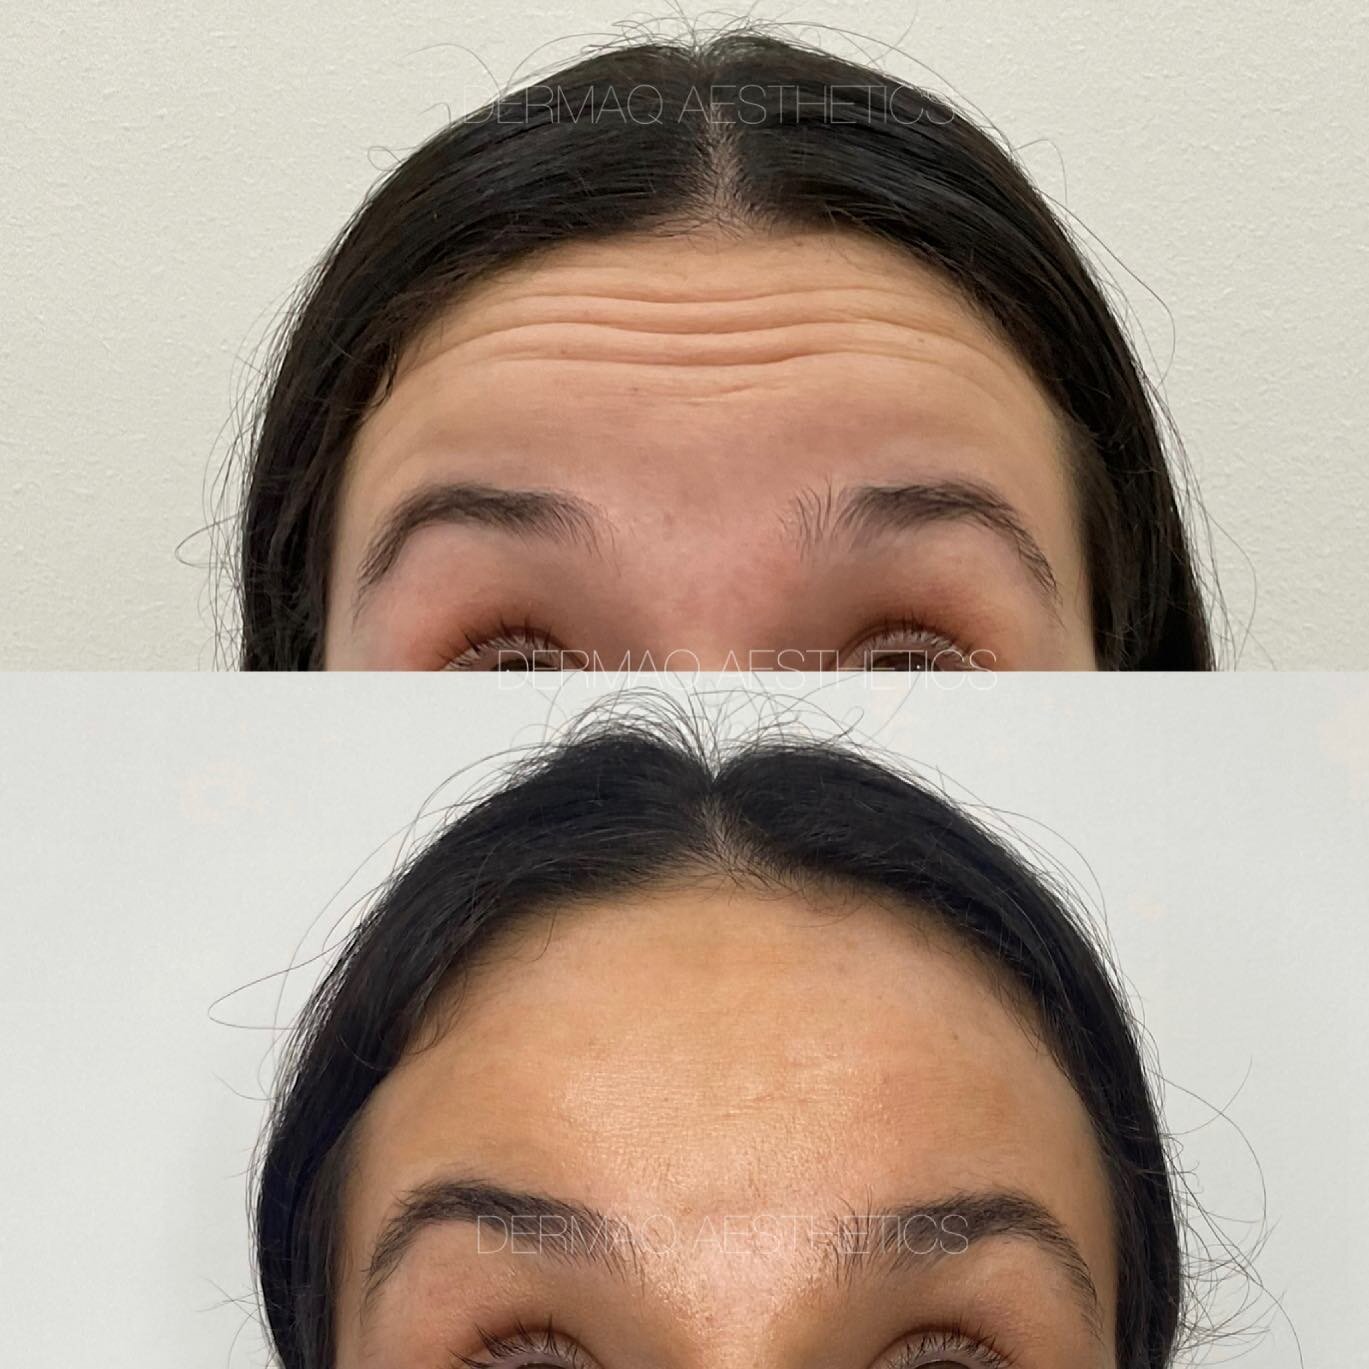 A sprinkle of anti-wrinkle to stop those pesky forehead lines from sticking around ✨ prevention is the key!

💉 Treatment: forehead anti-wrinkle injections 
⏰ Downtime: None
⏳ Longevity: 3-4 months
👩🏼&zwj;⚕️ Injector: Madeline
📱 Bookings: dermaq.c